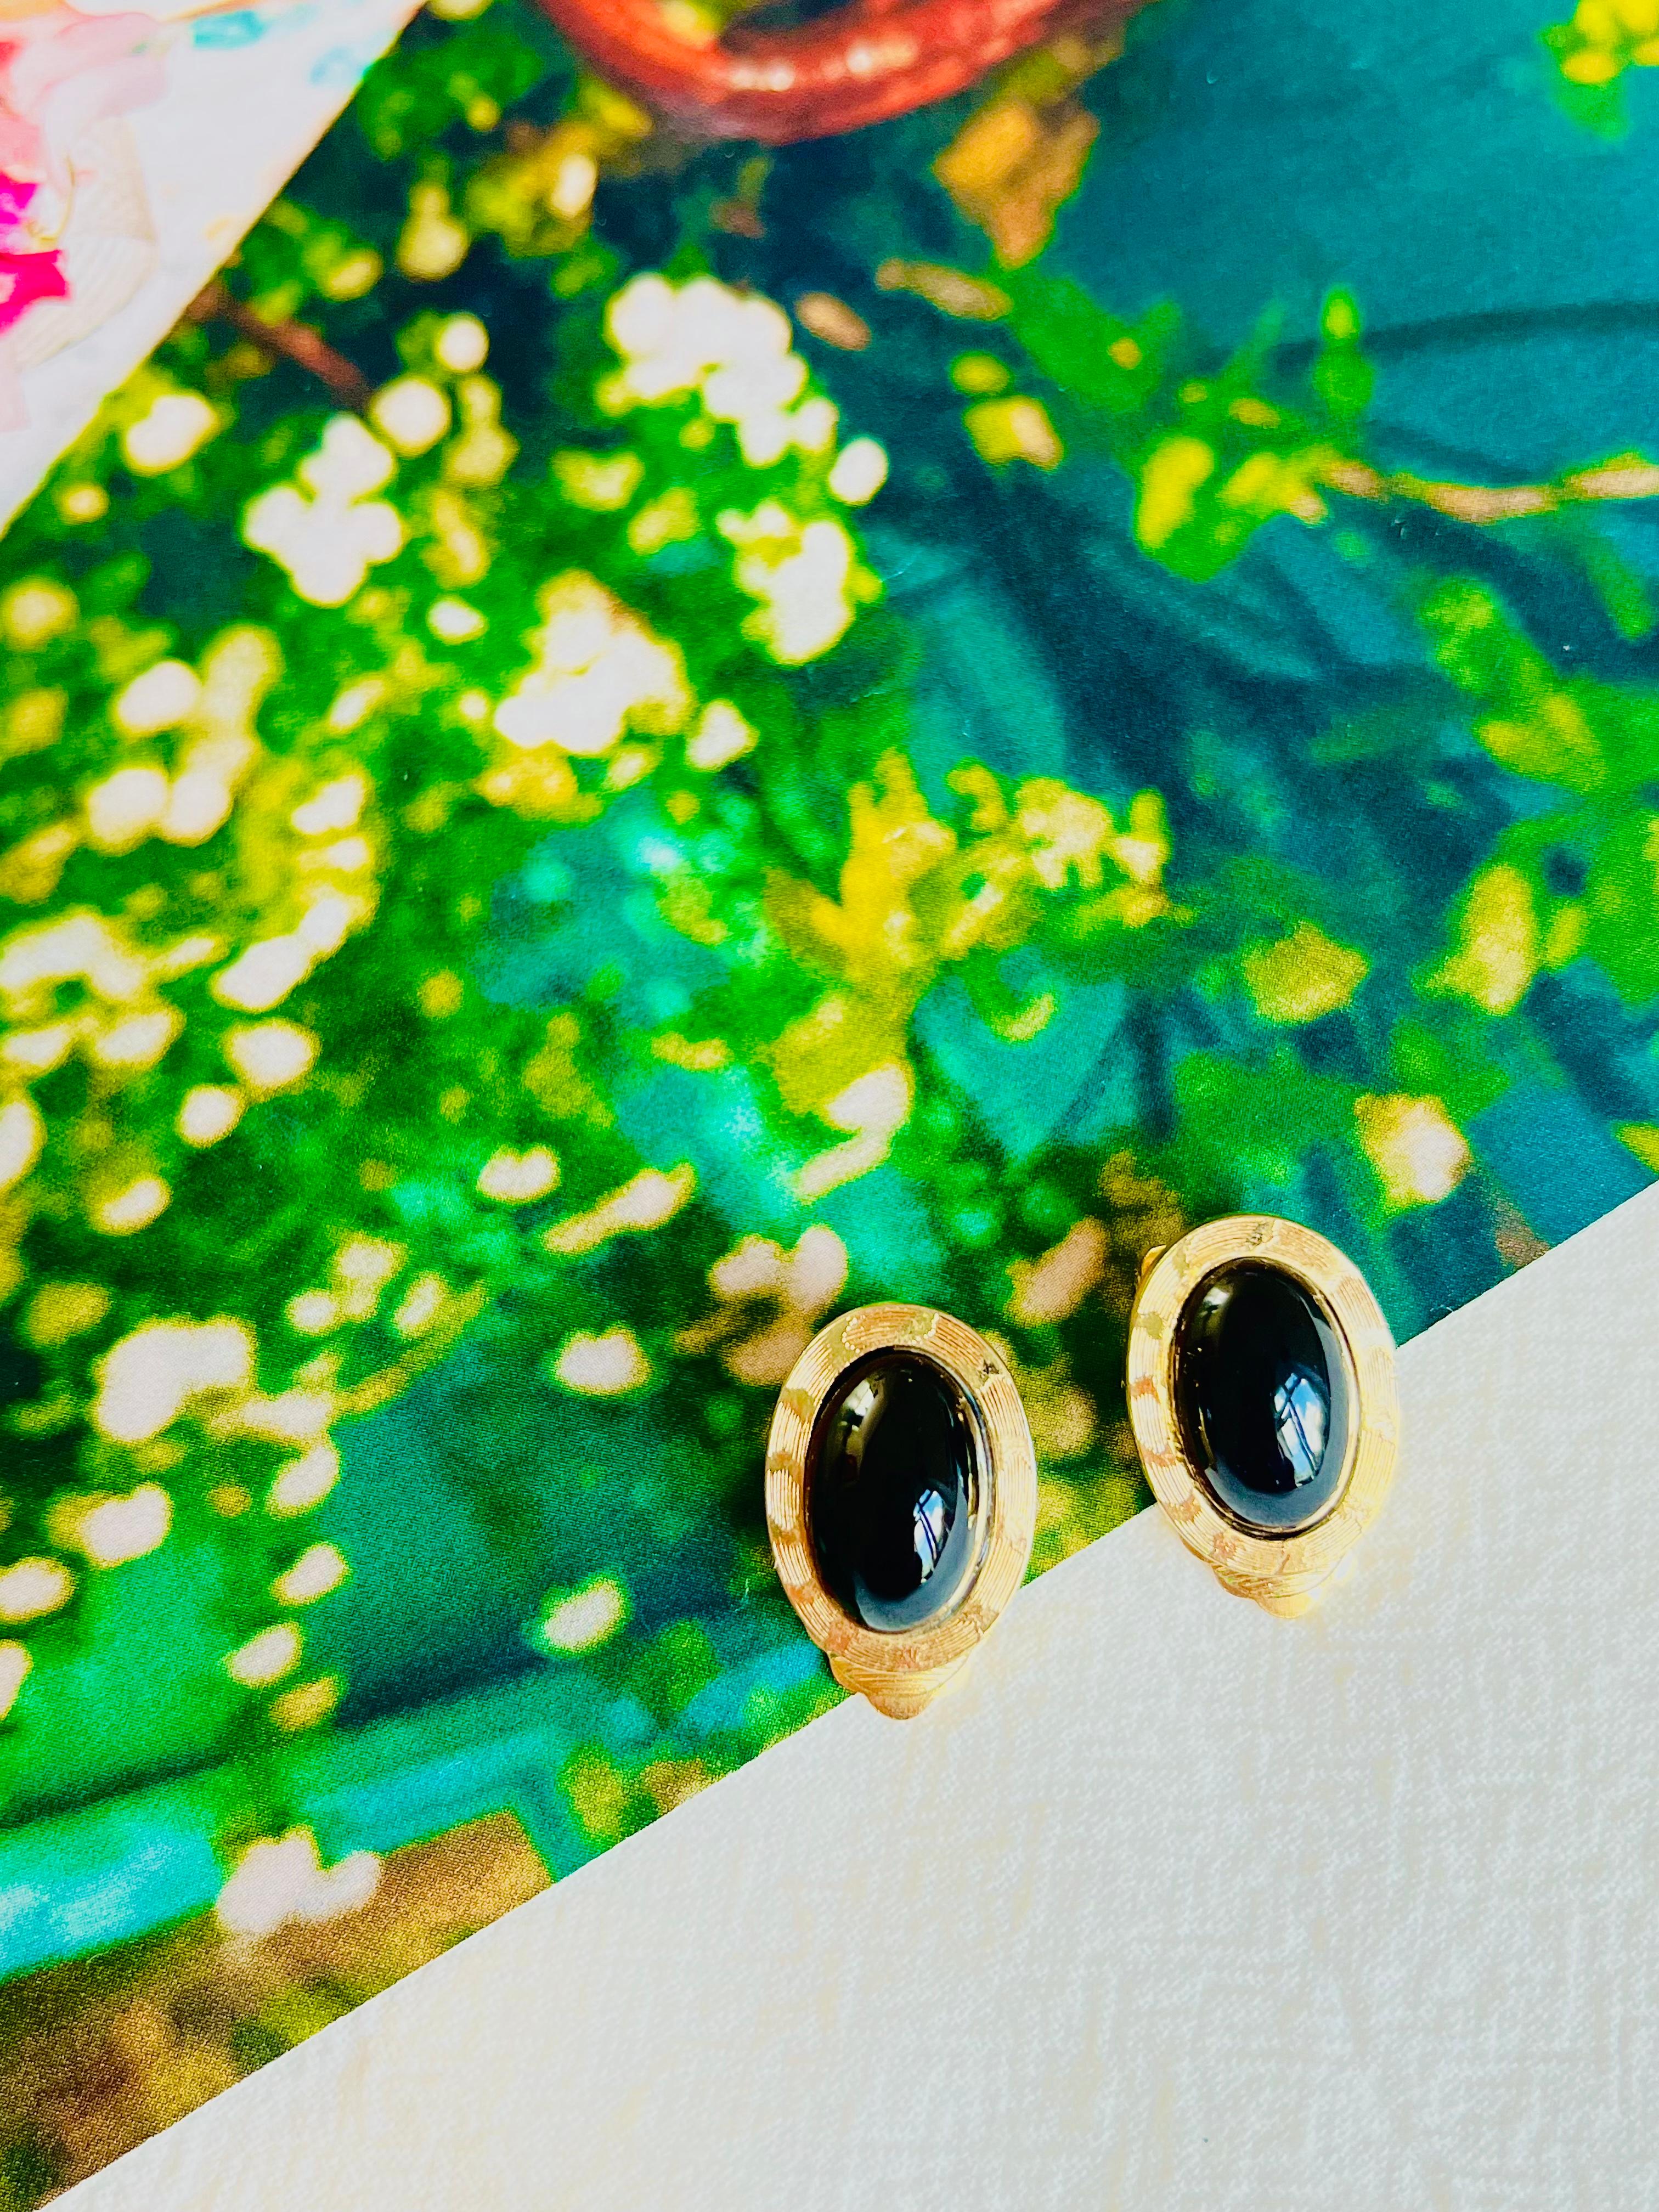 100% Genuine, Very good condition.

A very beautiful pair of clip on earrings, signed at the back.

Size: 1.9*1.4 cm.

Weight: 4.5 g/each.

_ _ _

Great for everyday wear. Come with velvet pouch and beautiful package.

Makes the perfect gift for